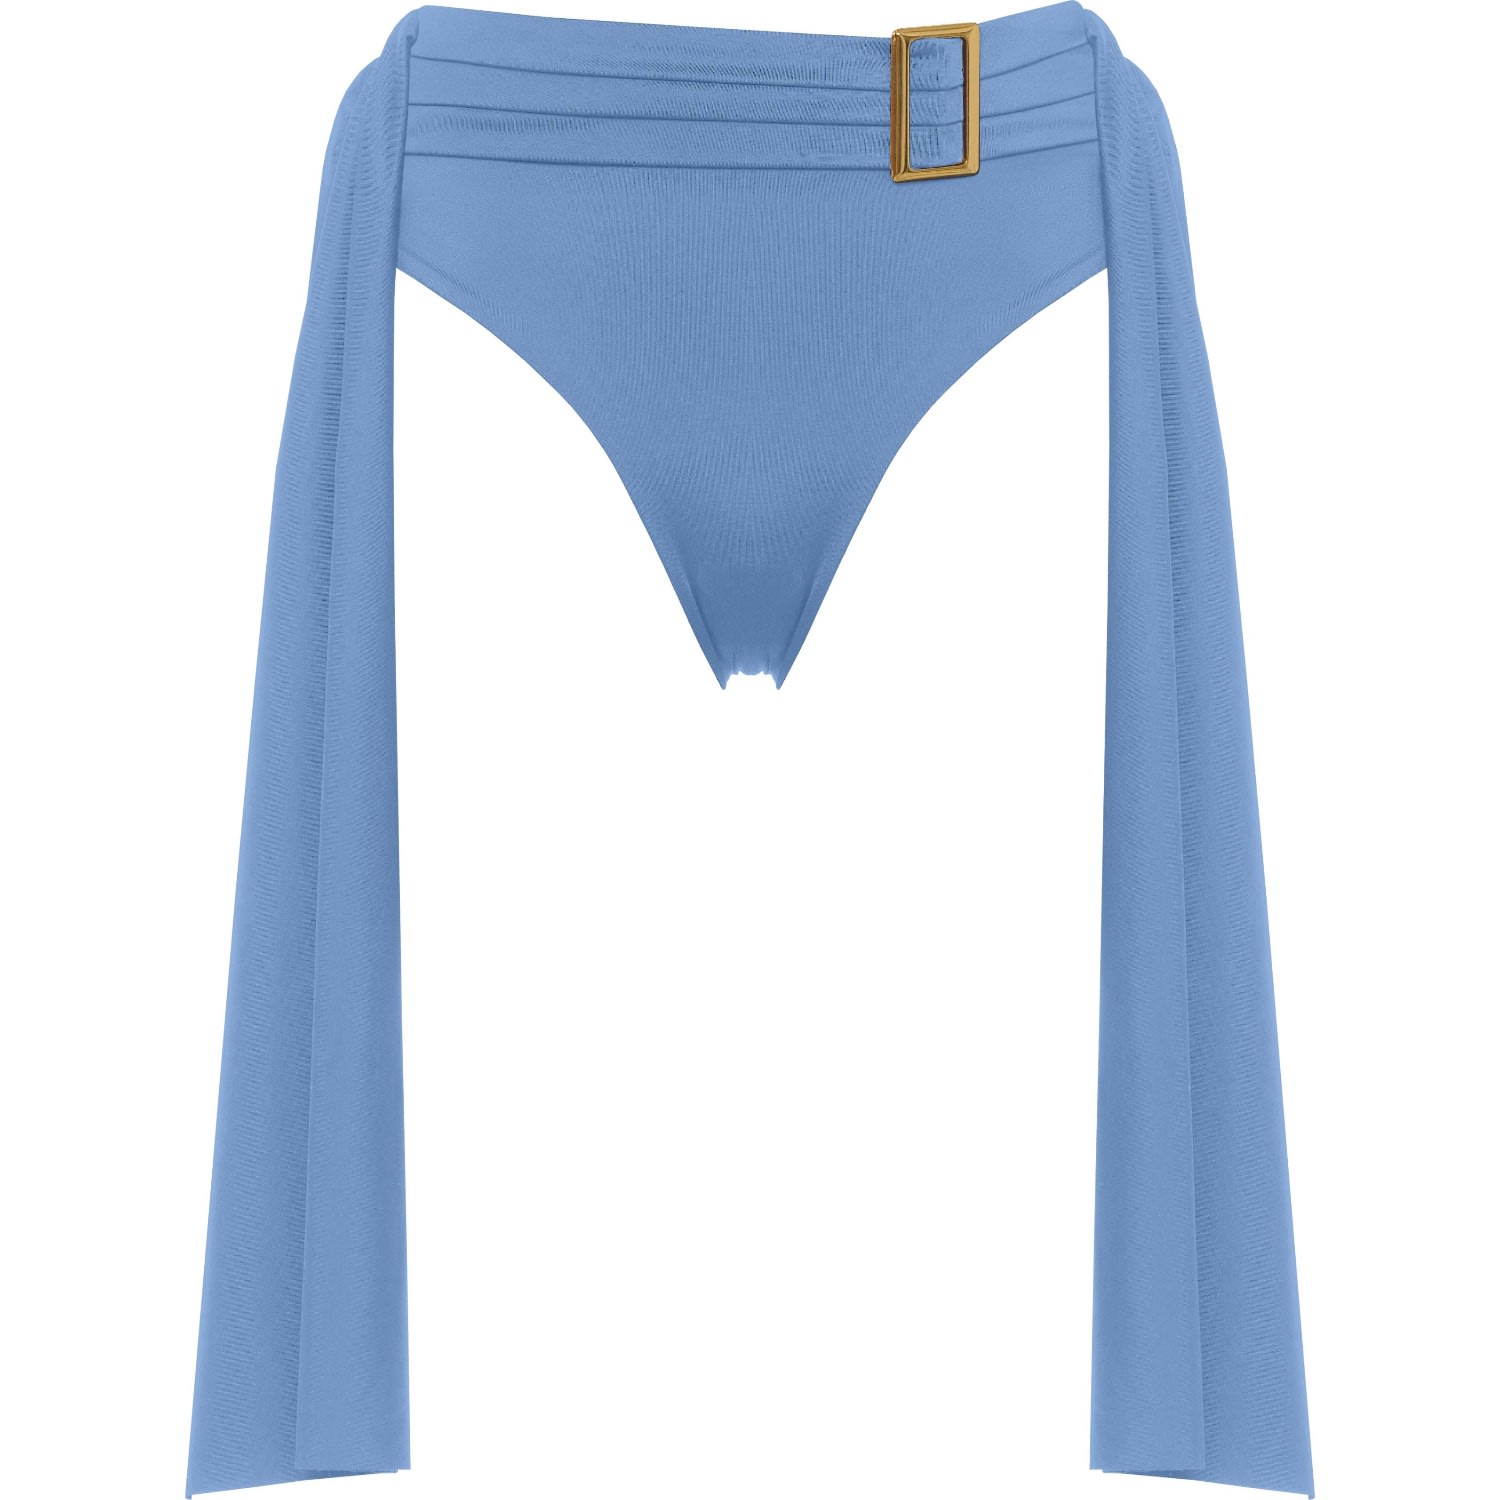 Women’s Amaze High Waisted Swimwear Bottom With Decorative Belt And Golden Buckle In Blue Extra Small Antoninias